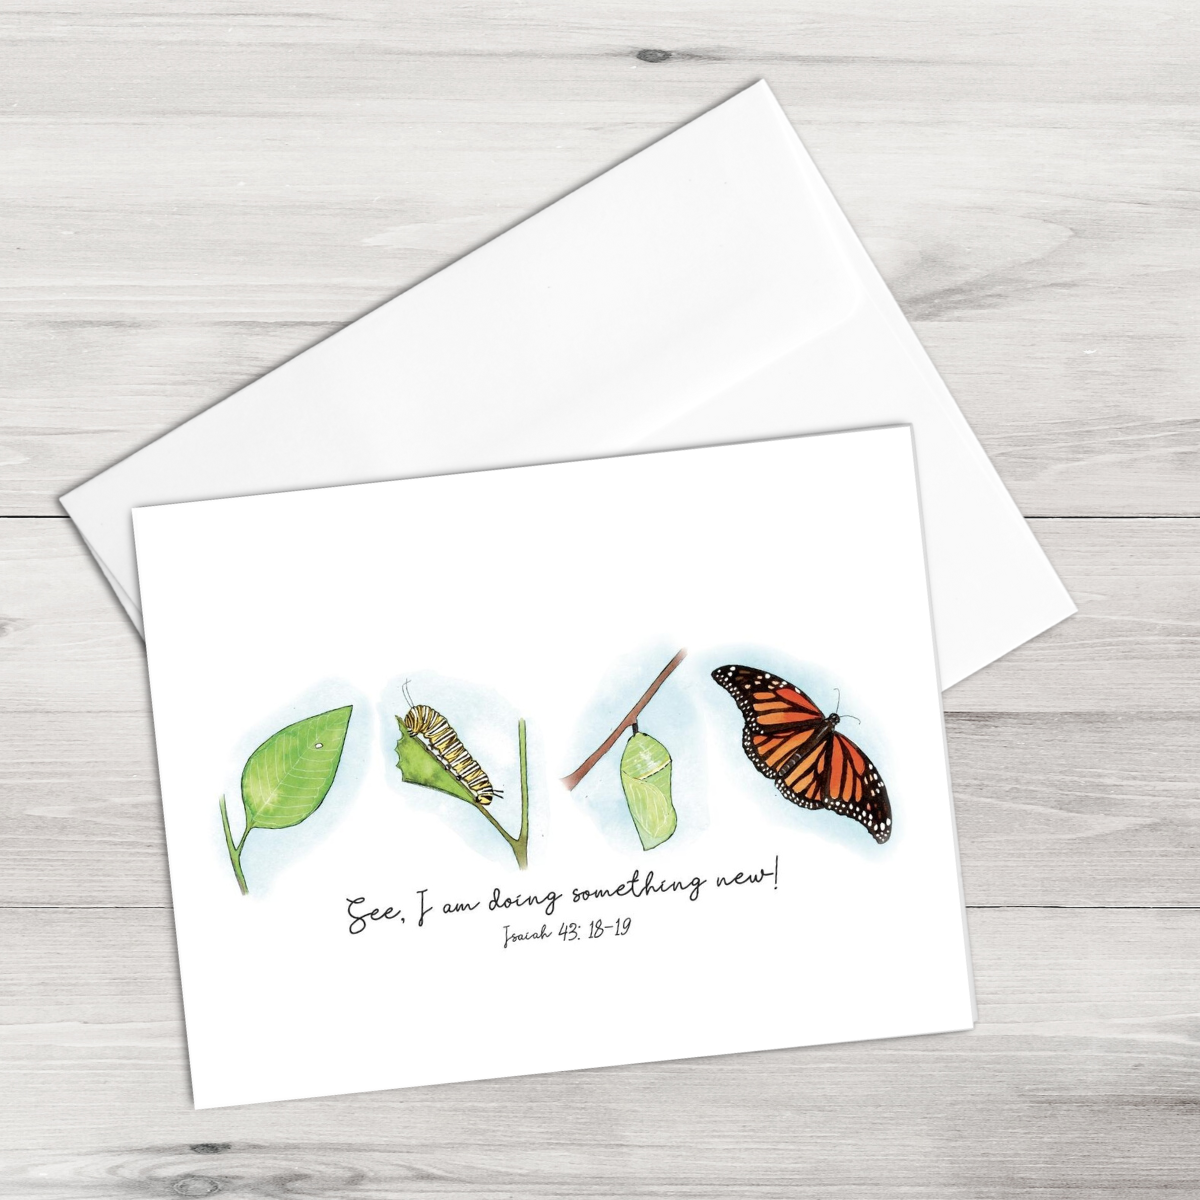 See, I Am Doing Something New - Isaiah 43:19 Blank Notecards - Set of 6 Cards